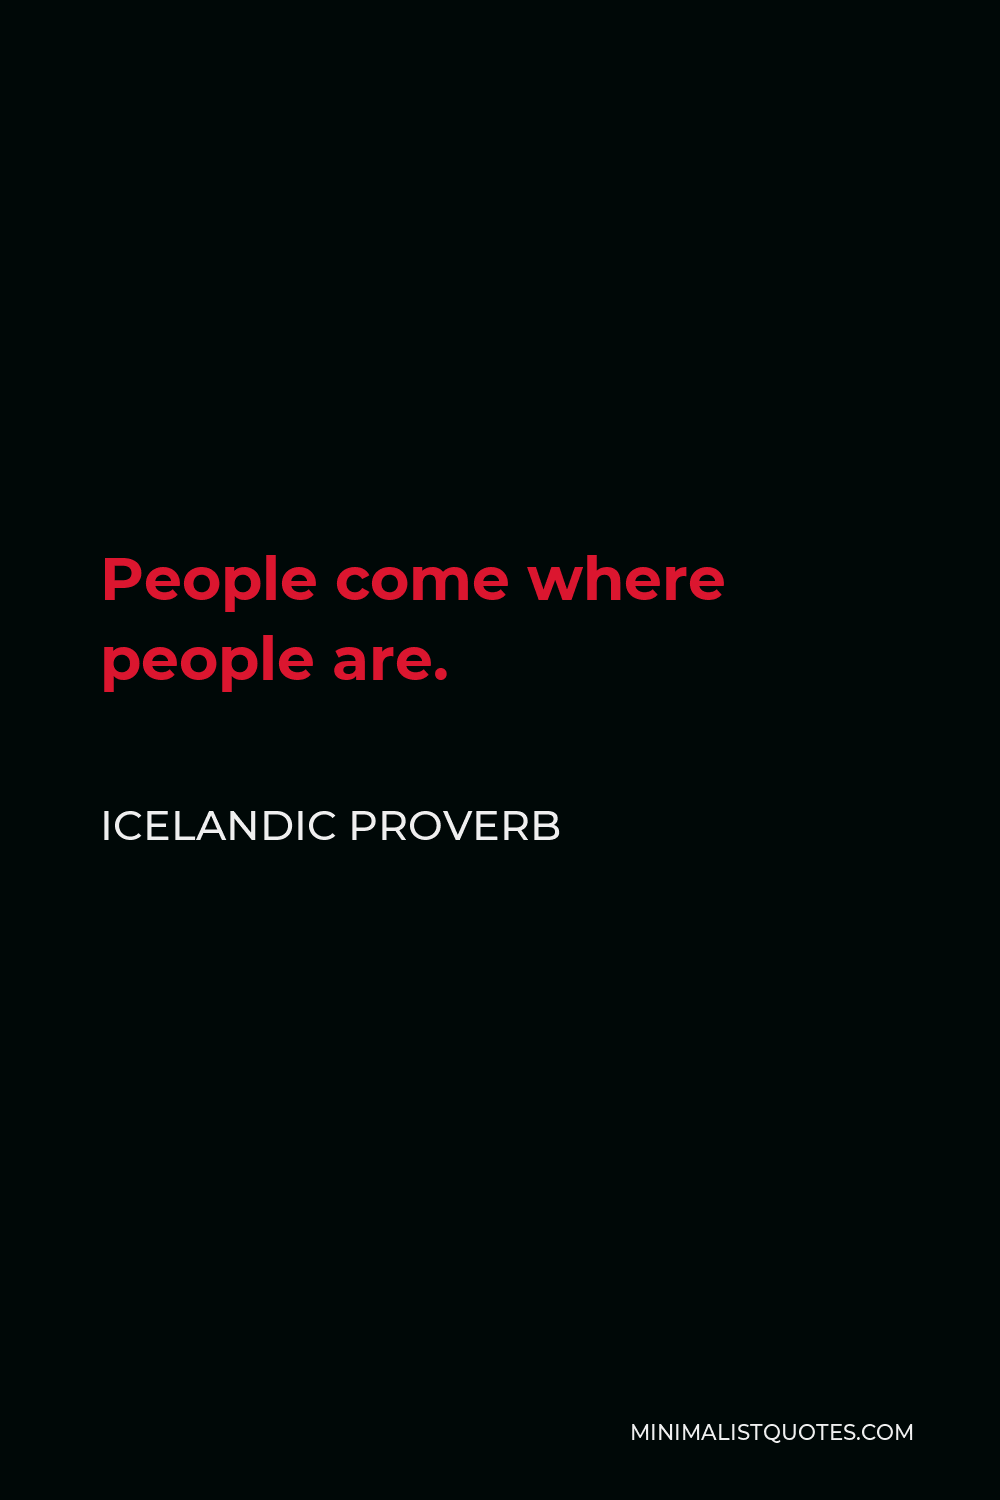 Icelandic Proverb Quote - People come where people are.